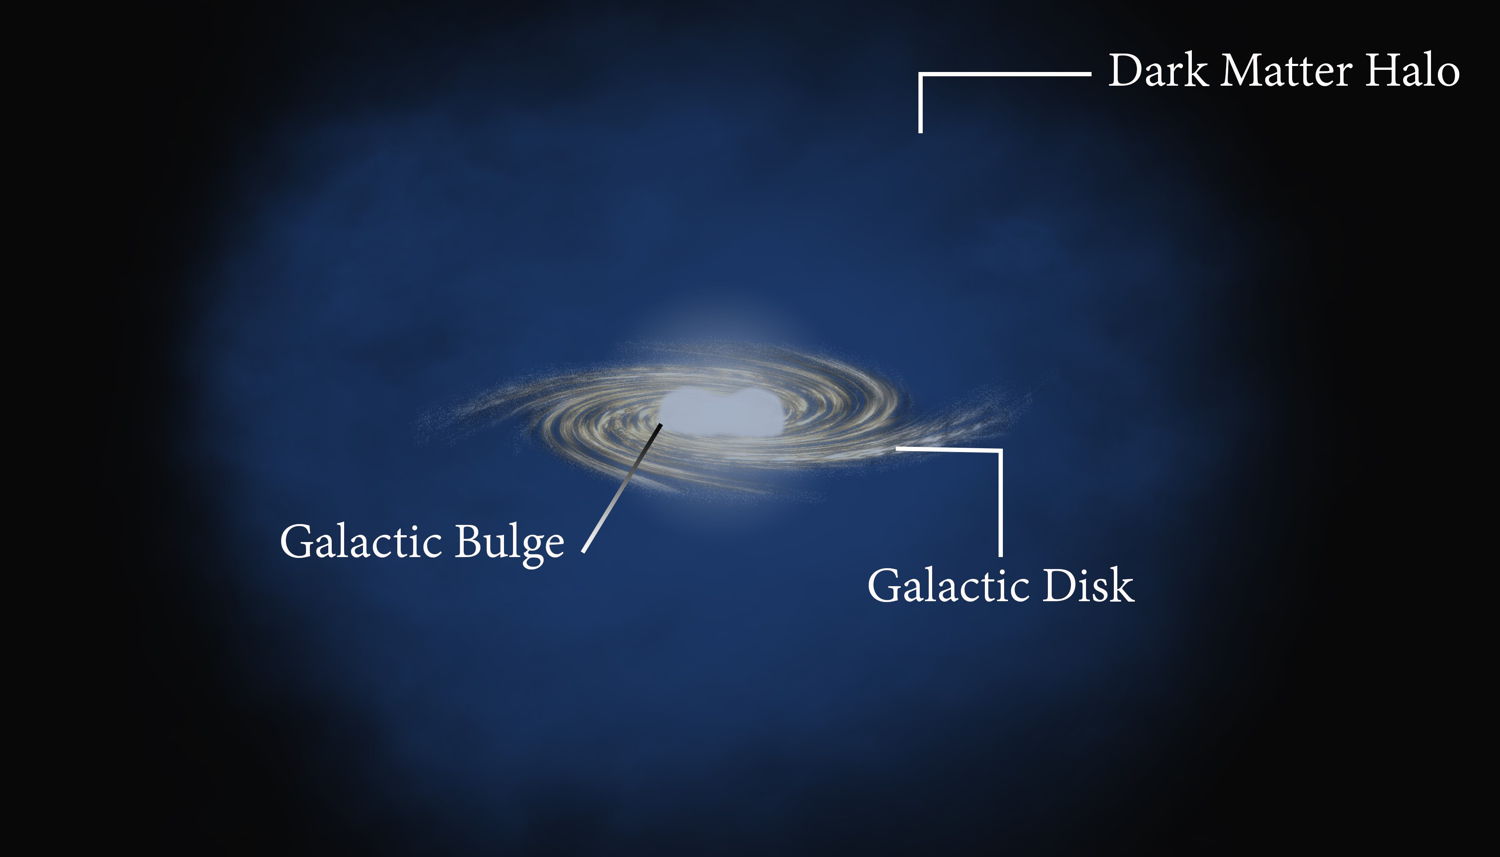 An artist's impression of Milky Way, with the Galactic bulge at the centre. Image credit: L Jaramillo and O Macias, Virginia Tech